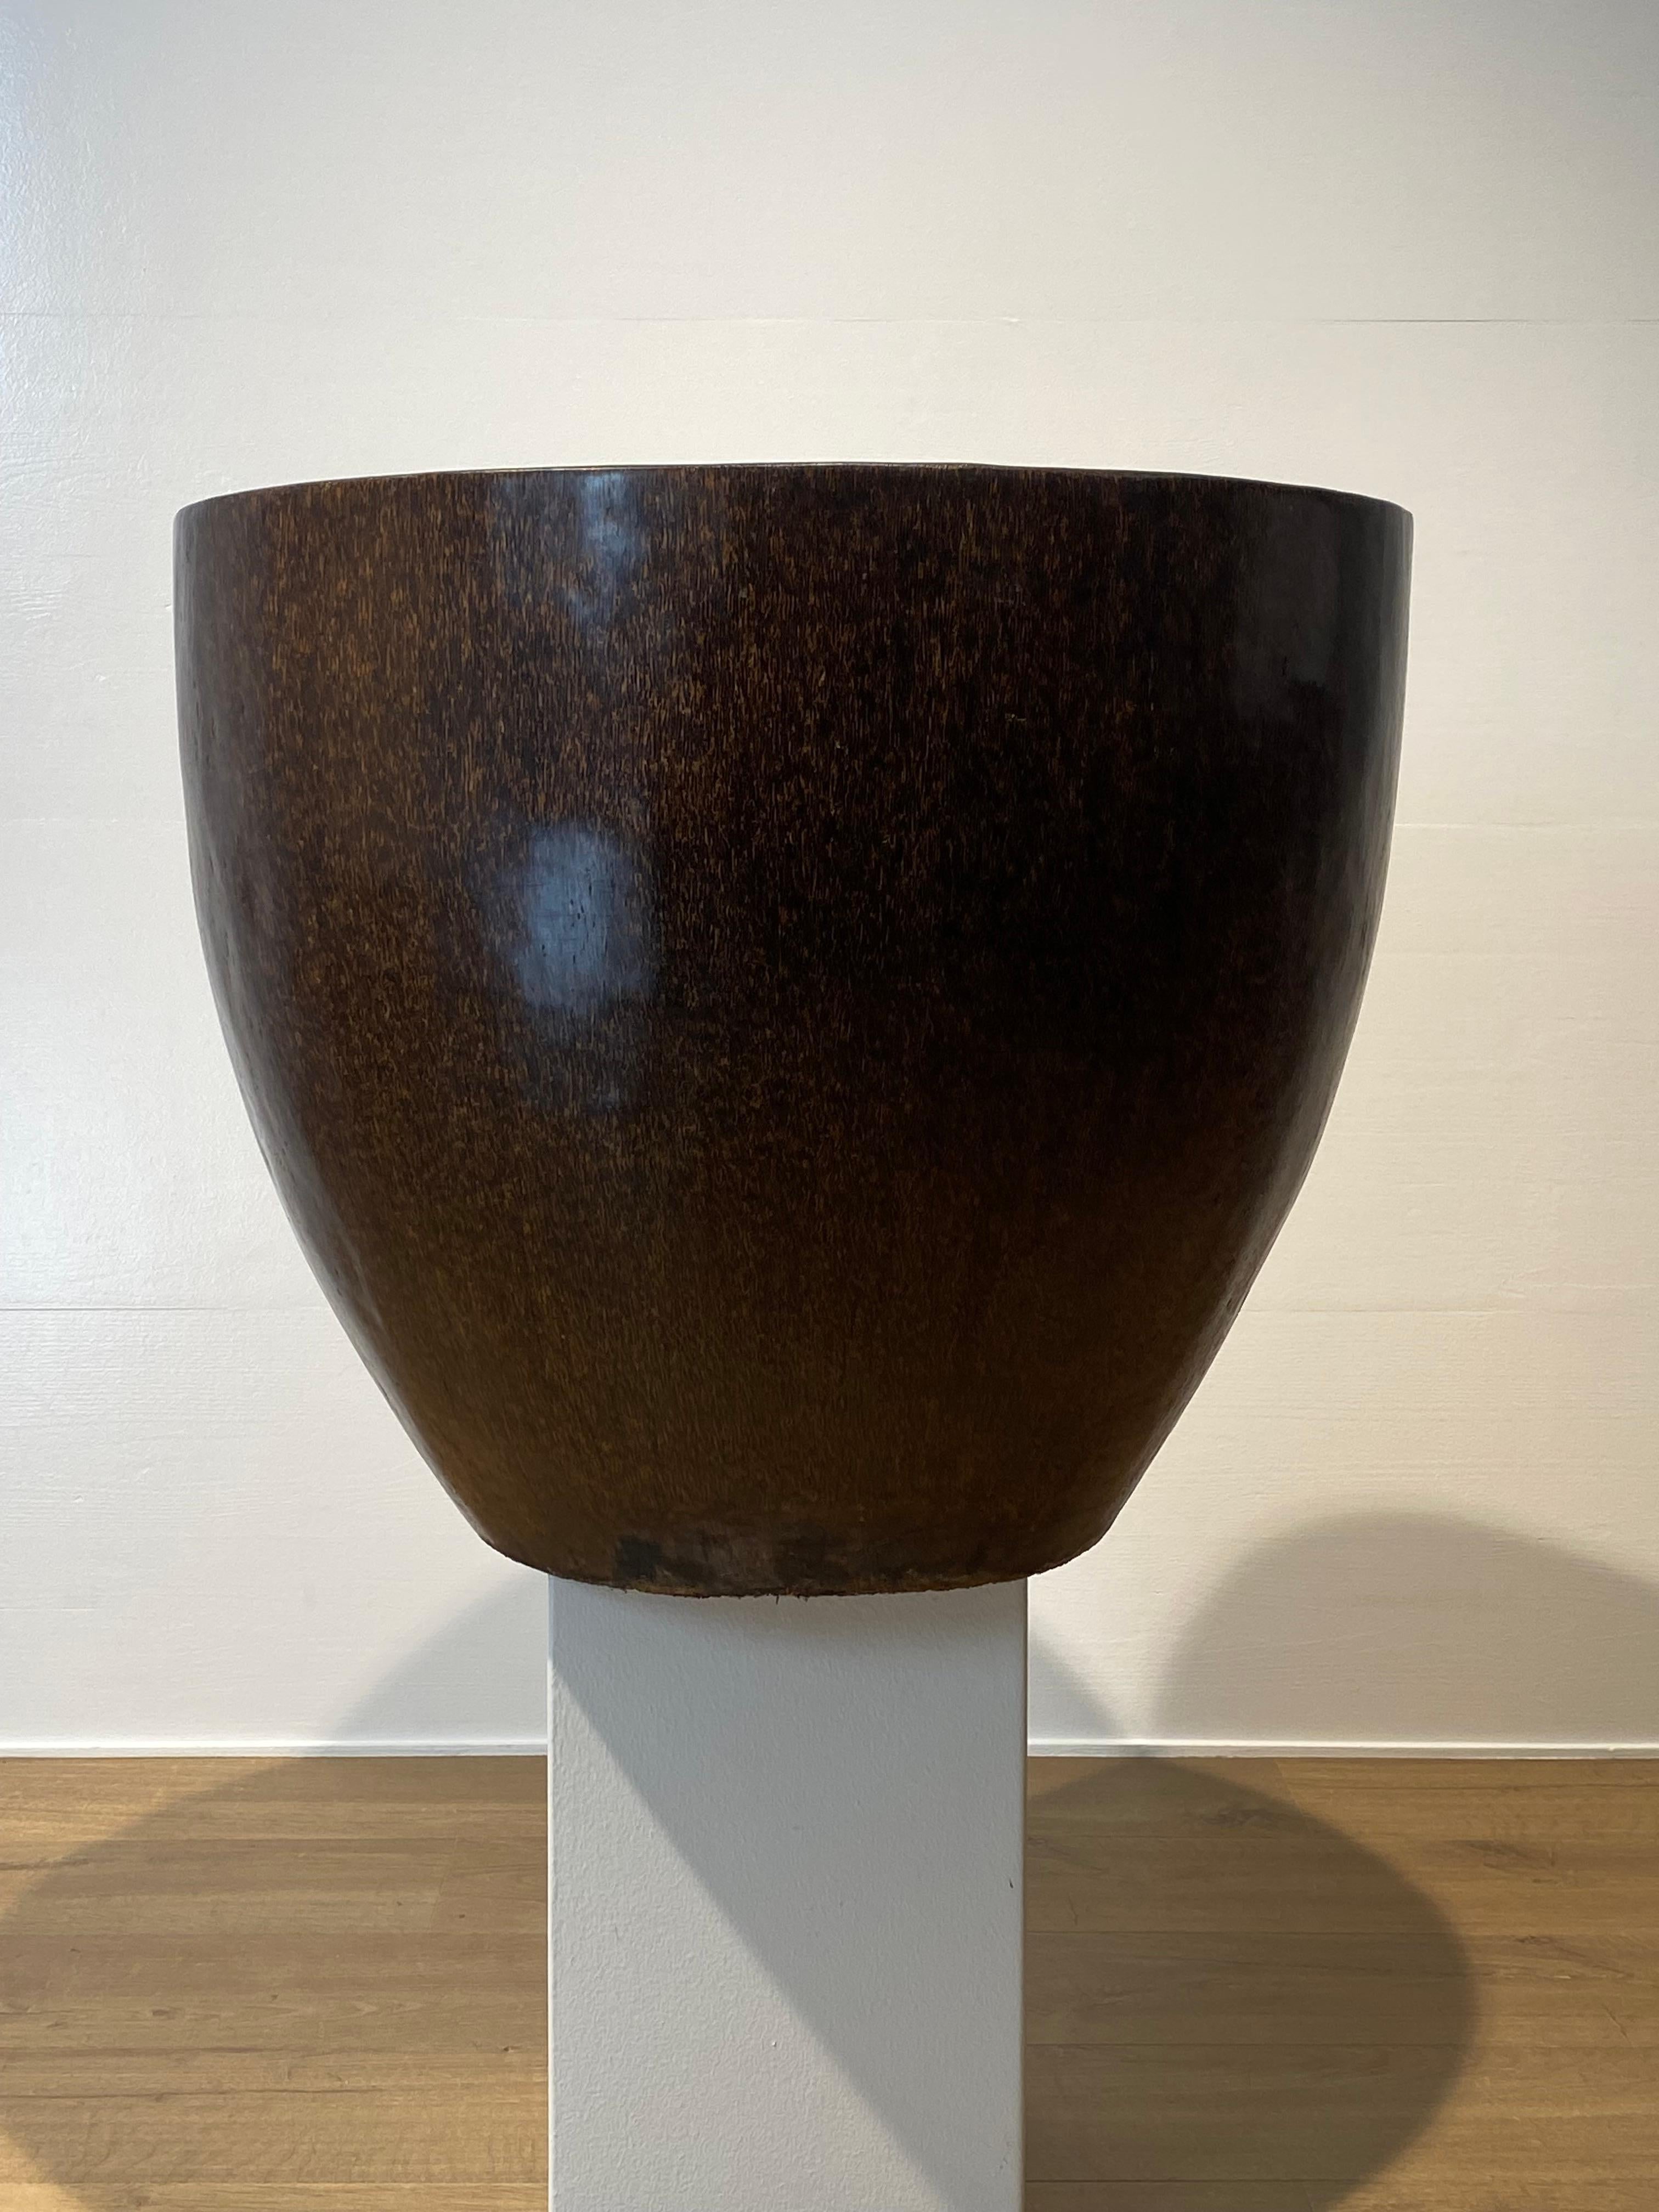 Brutalist Wooden Pot made from the trunk of a Palmtree,
nice and warm patina of the Palmtree Wood,
xl size, very decorative object  to be used for different purposes